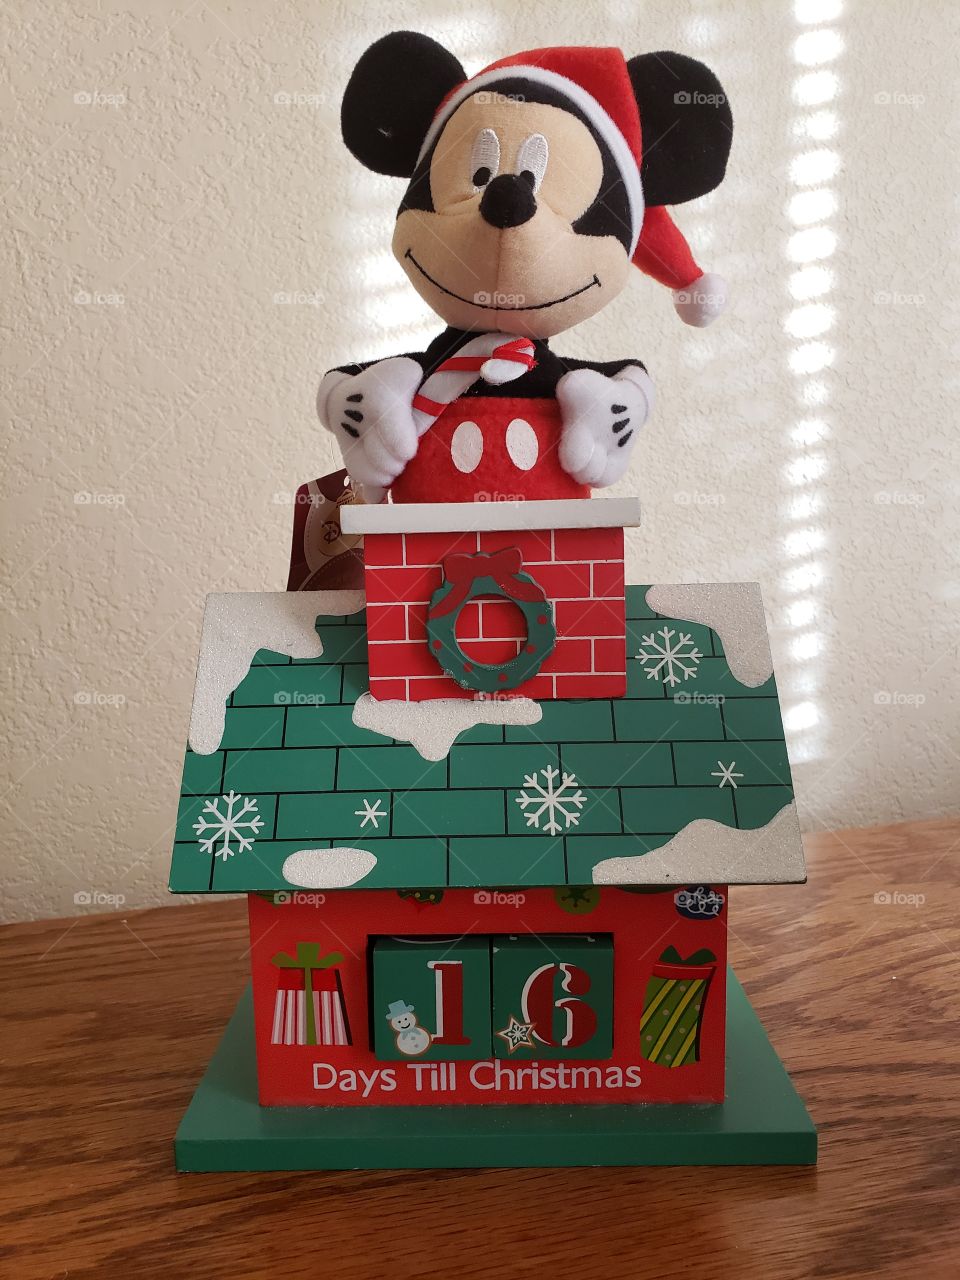 Micky mouse says 16 more days until Christmas. I cant wait
Merry Christmas everyone